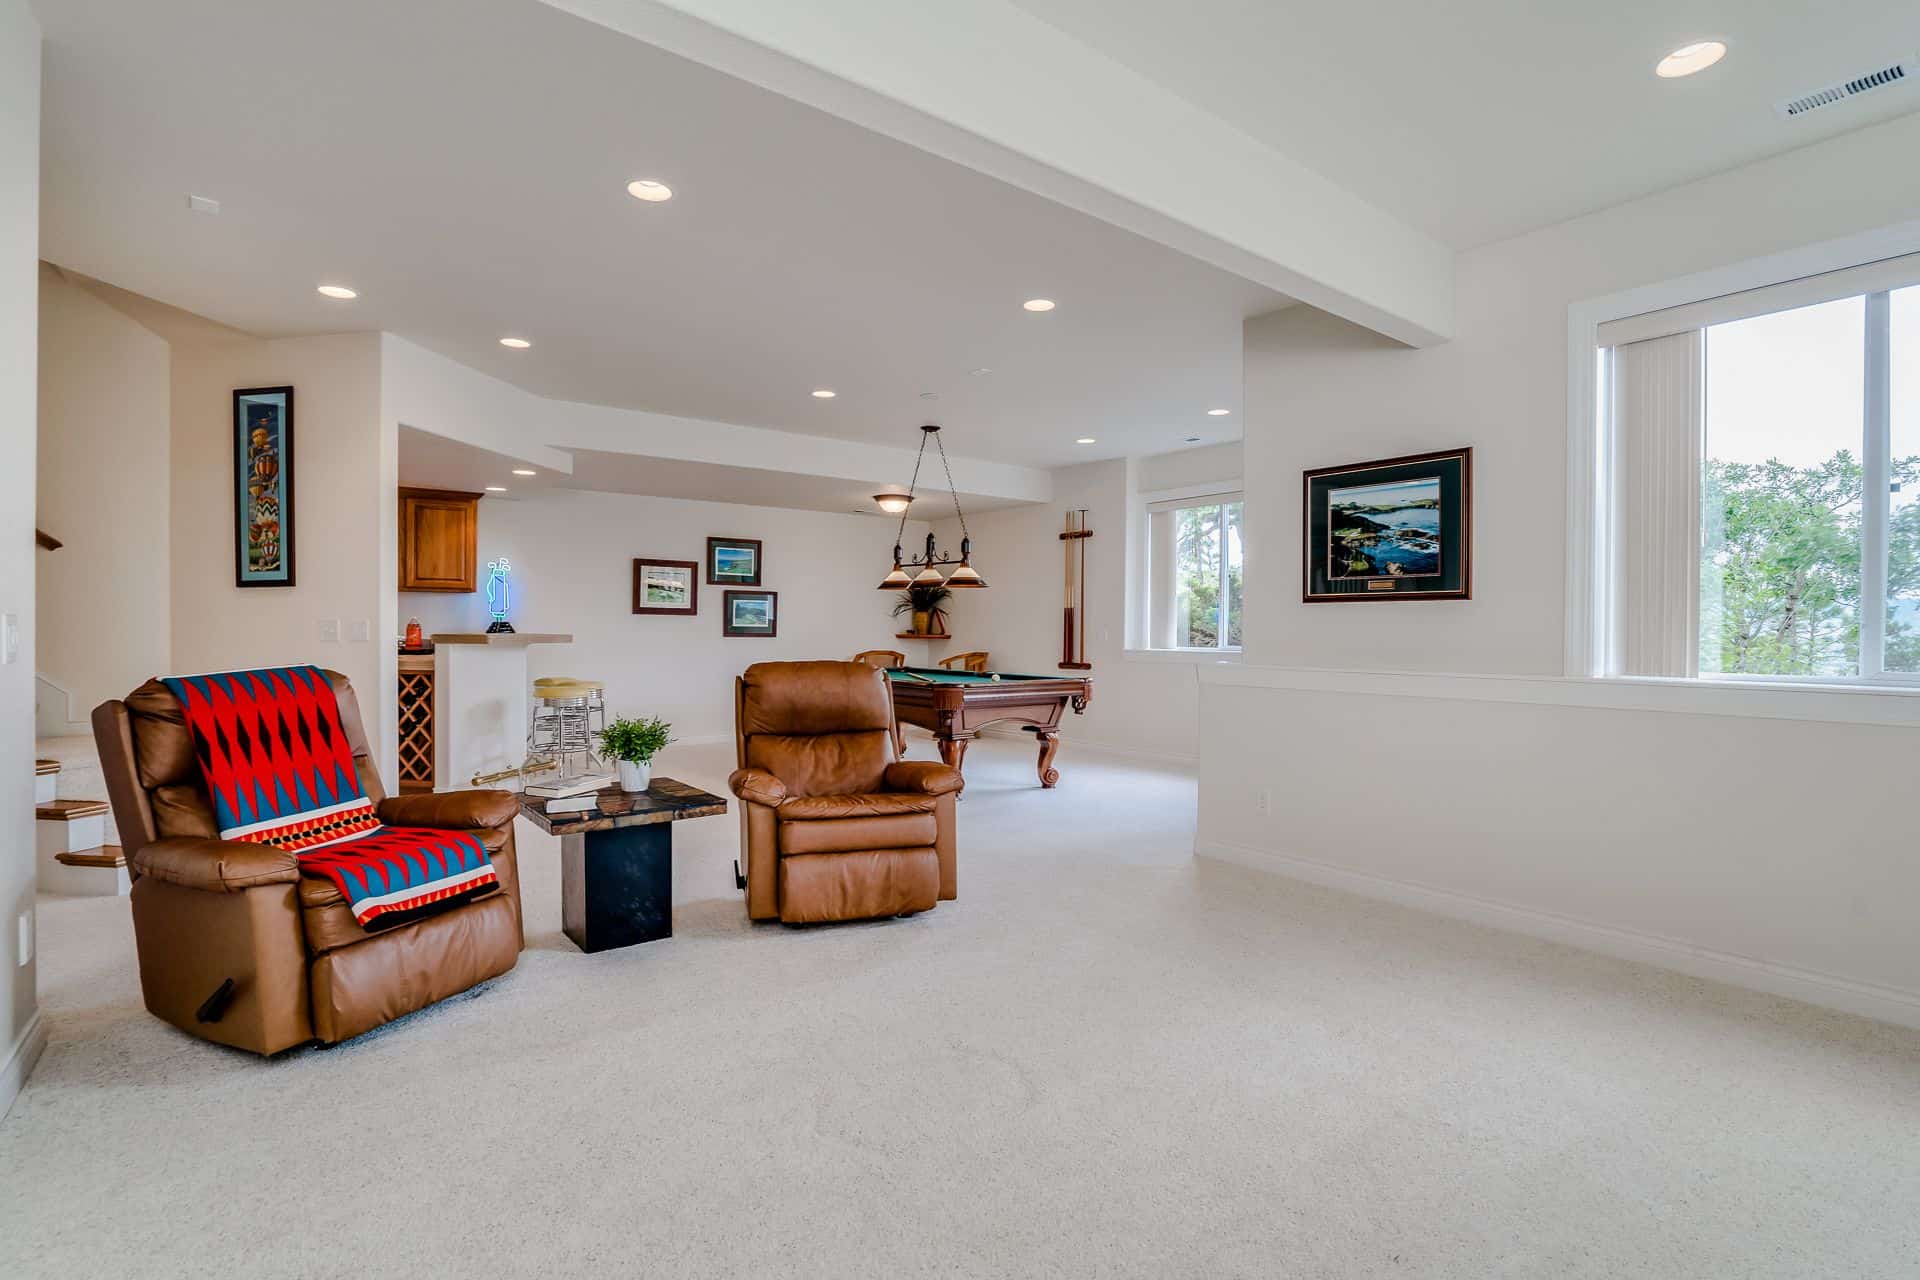 Basement Family Room and Rec Area